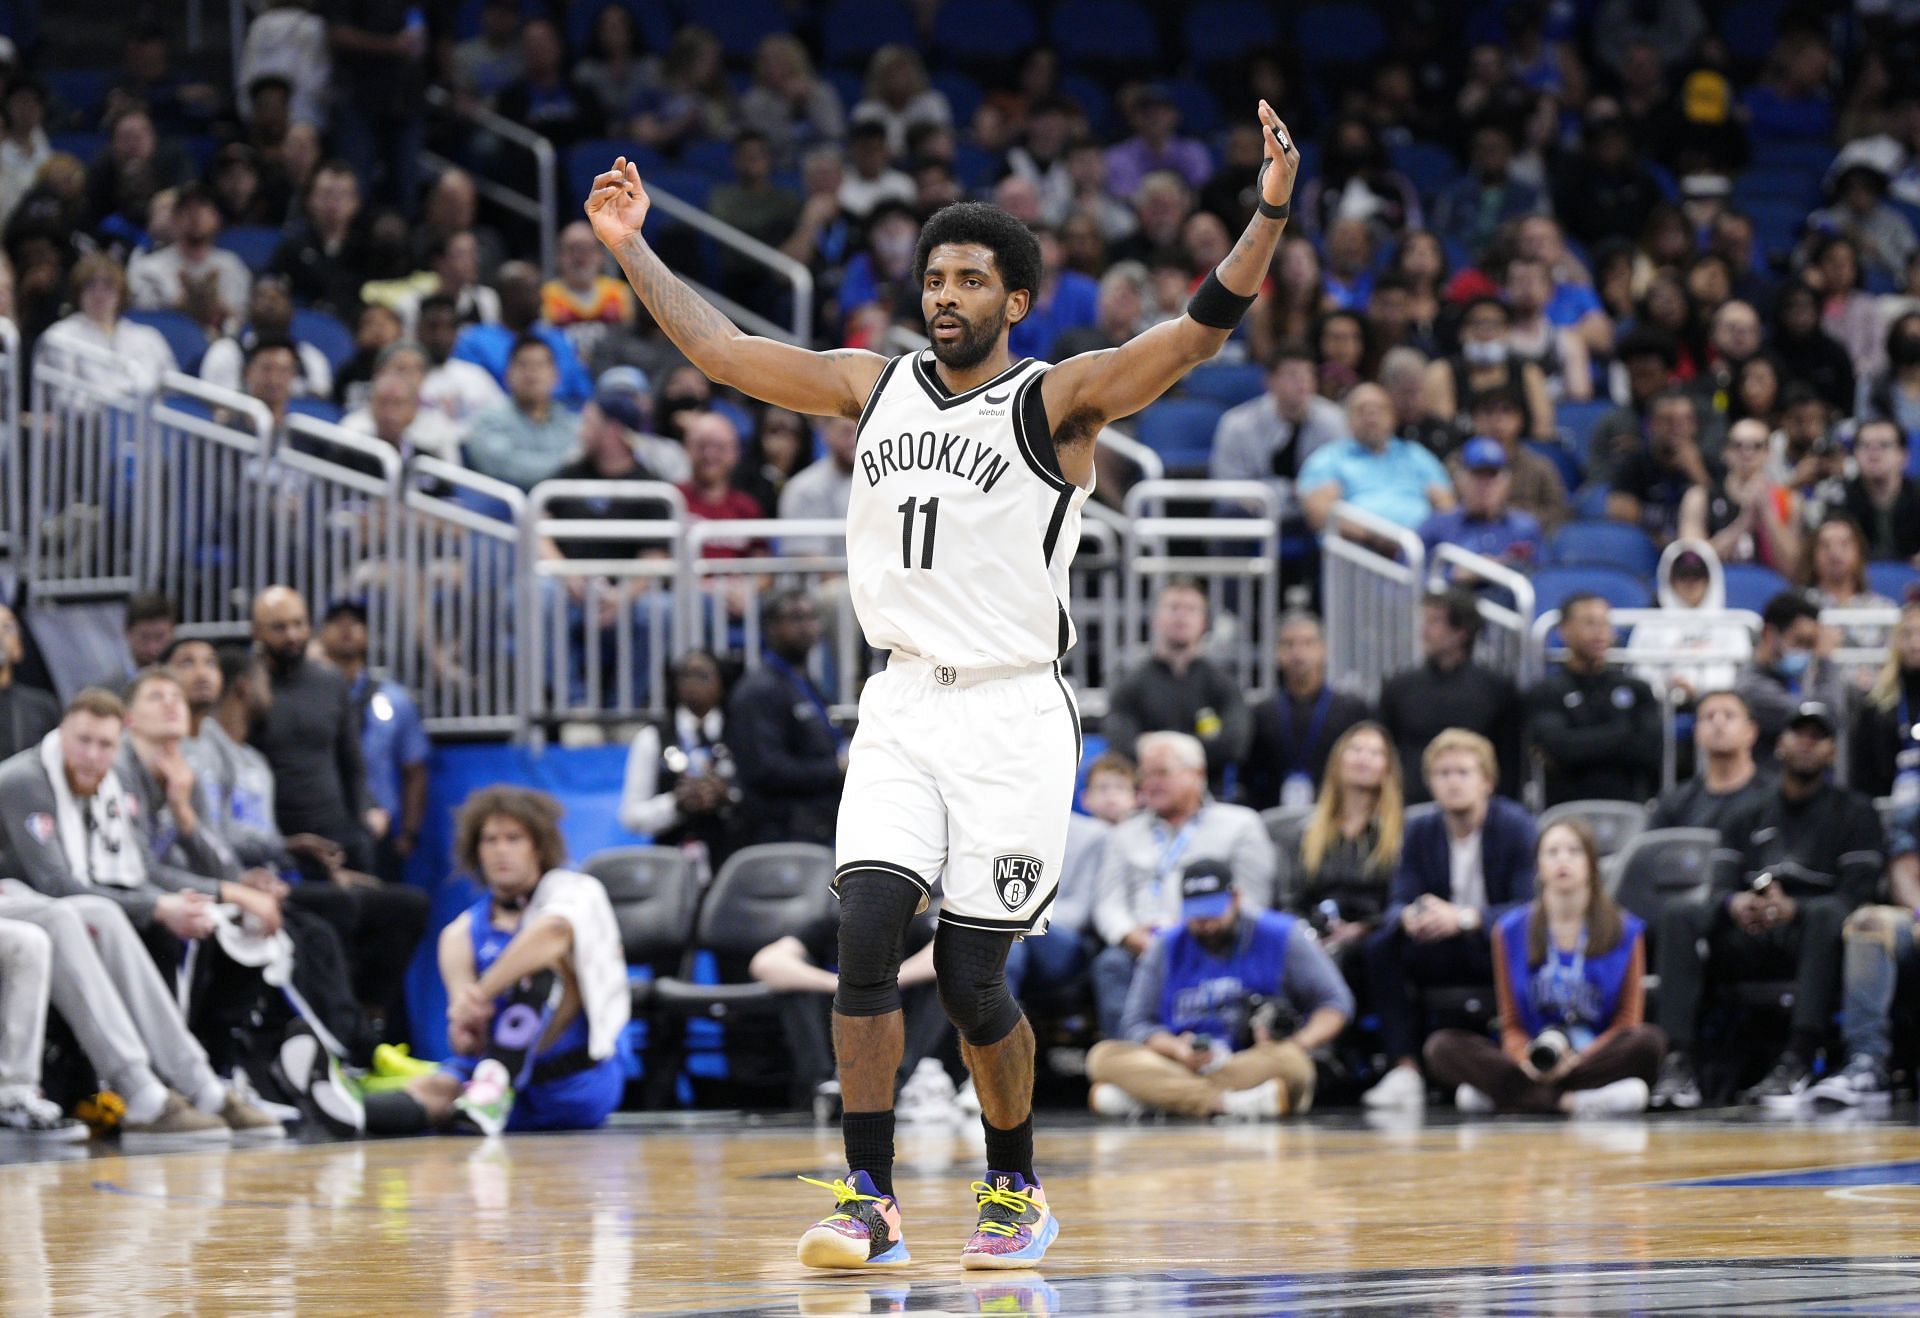 Kyrie Irving of the Brooklyn Nets celebrates after scoring against the Orlando Magic